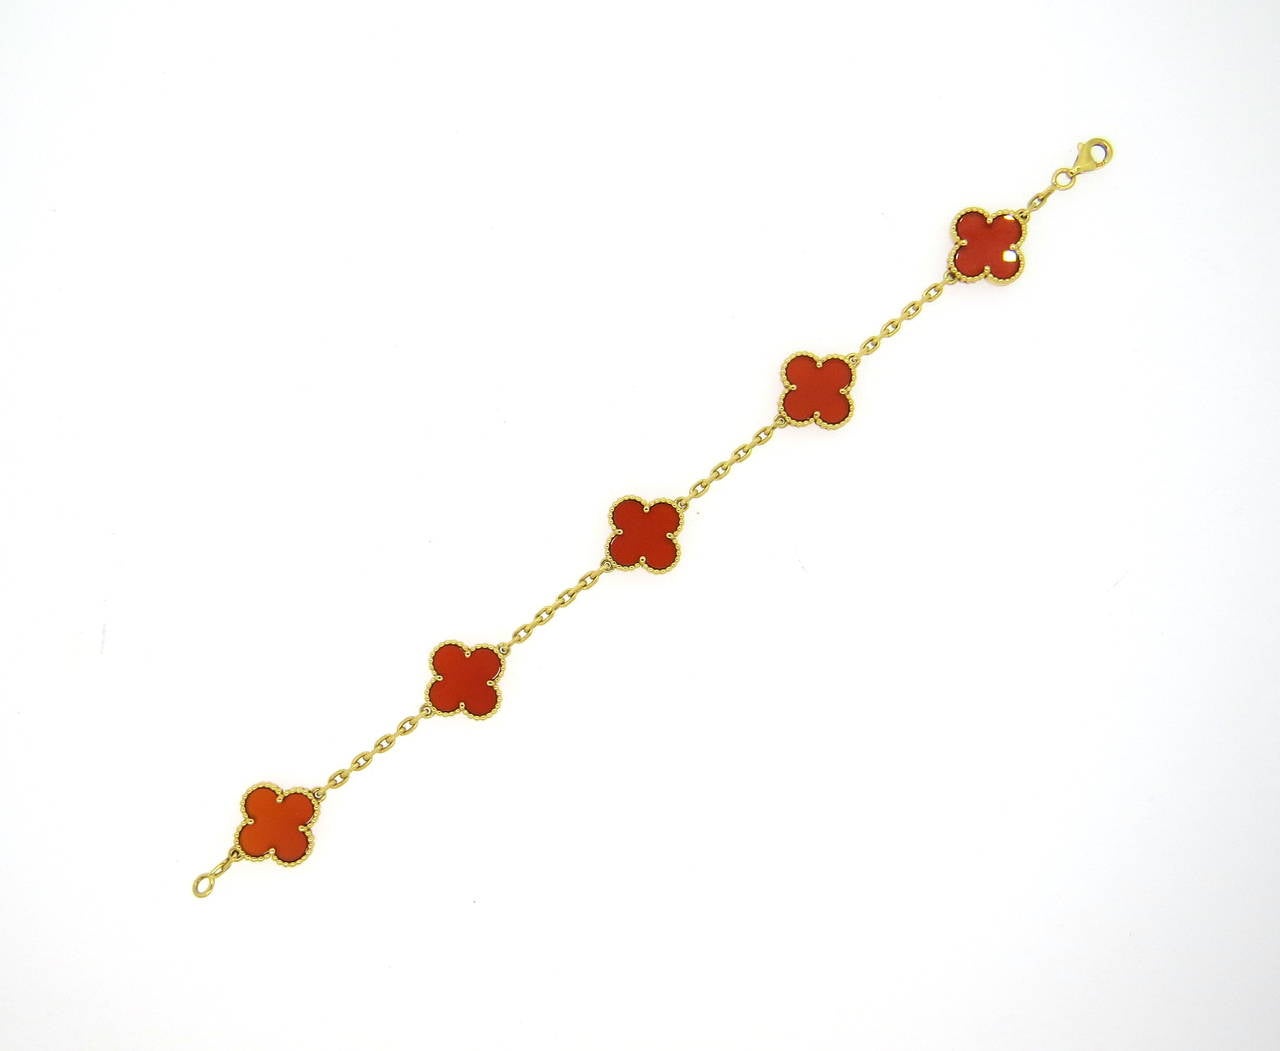 Beautiful 18k yellow gold clover necklace and bracelet set, crafted by Van Cleef  & Arpels for iconic Vintage Alhambra collection, set with carnelian stones. Necklace is 17